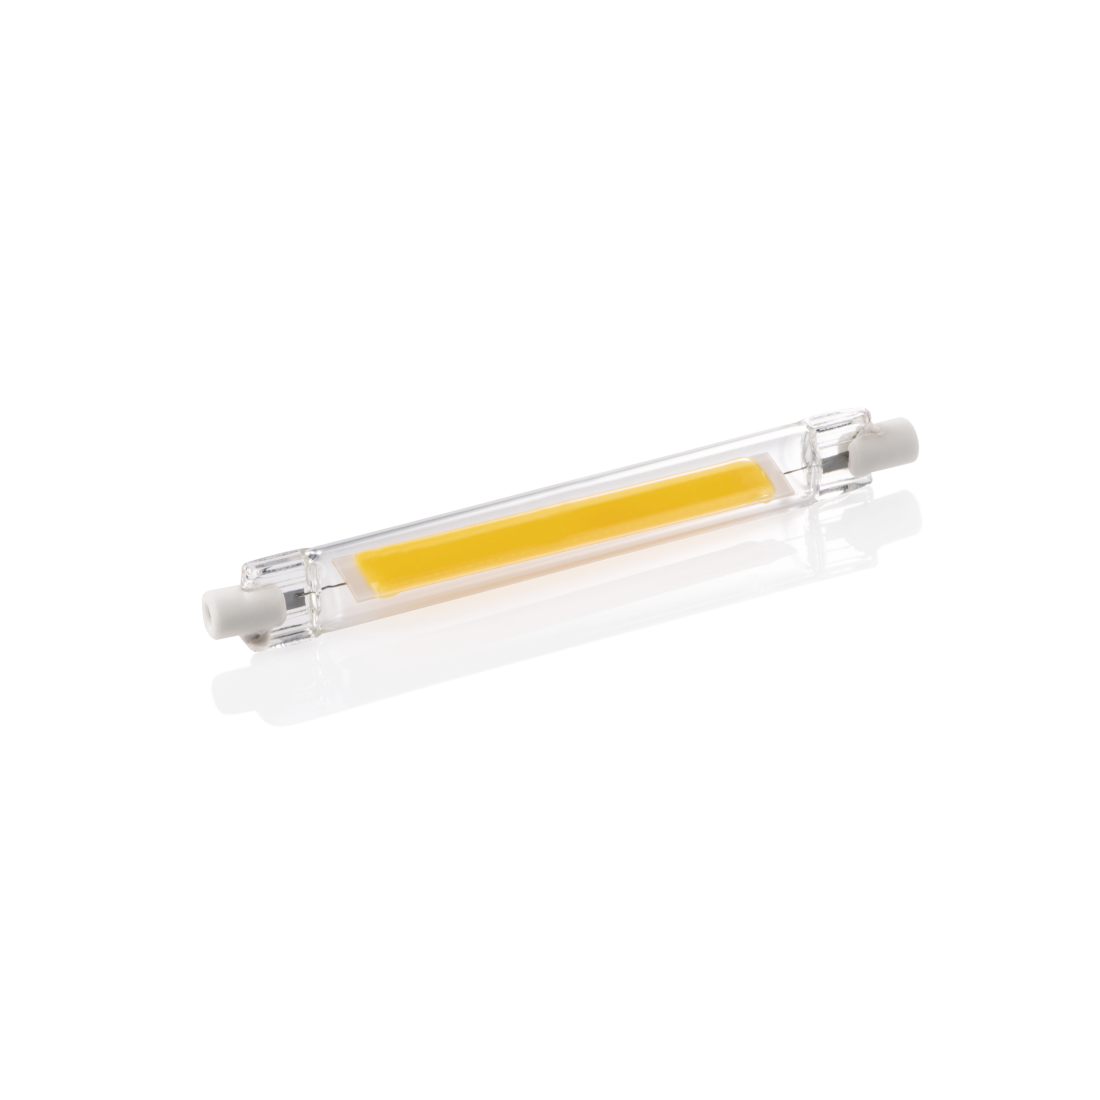 abx2 High-Res Image 2 - Xavax, LED Bulb, R7s, 850 lm, Replaces 63W, Tube, warm white